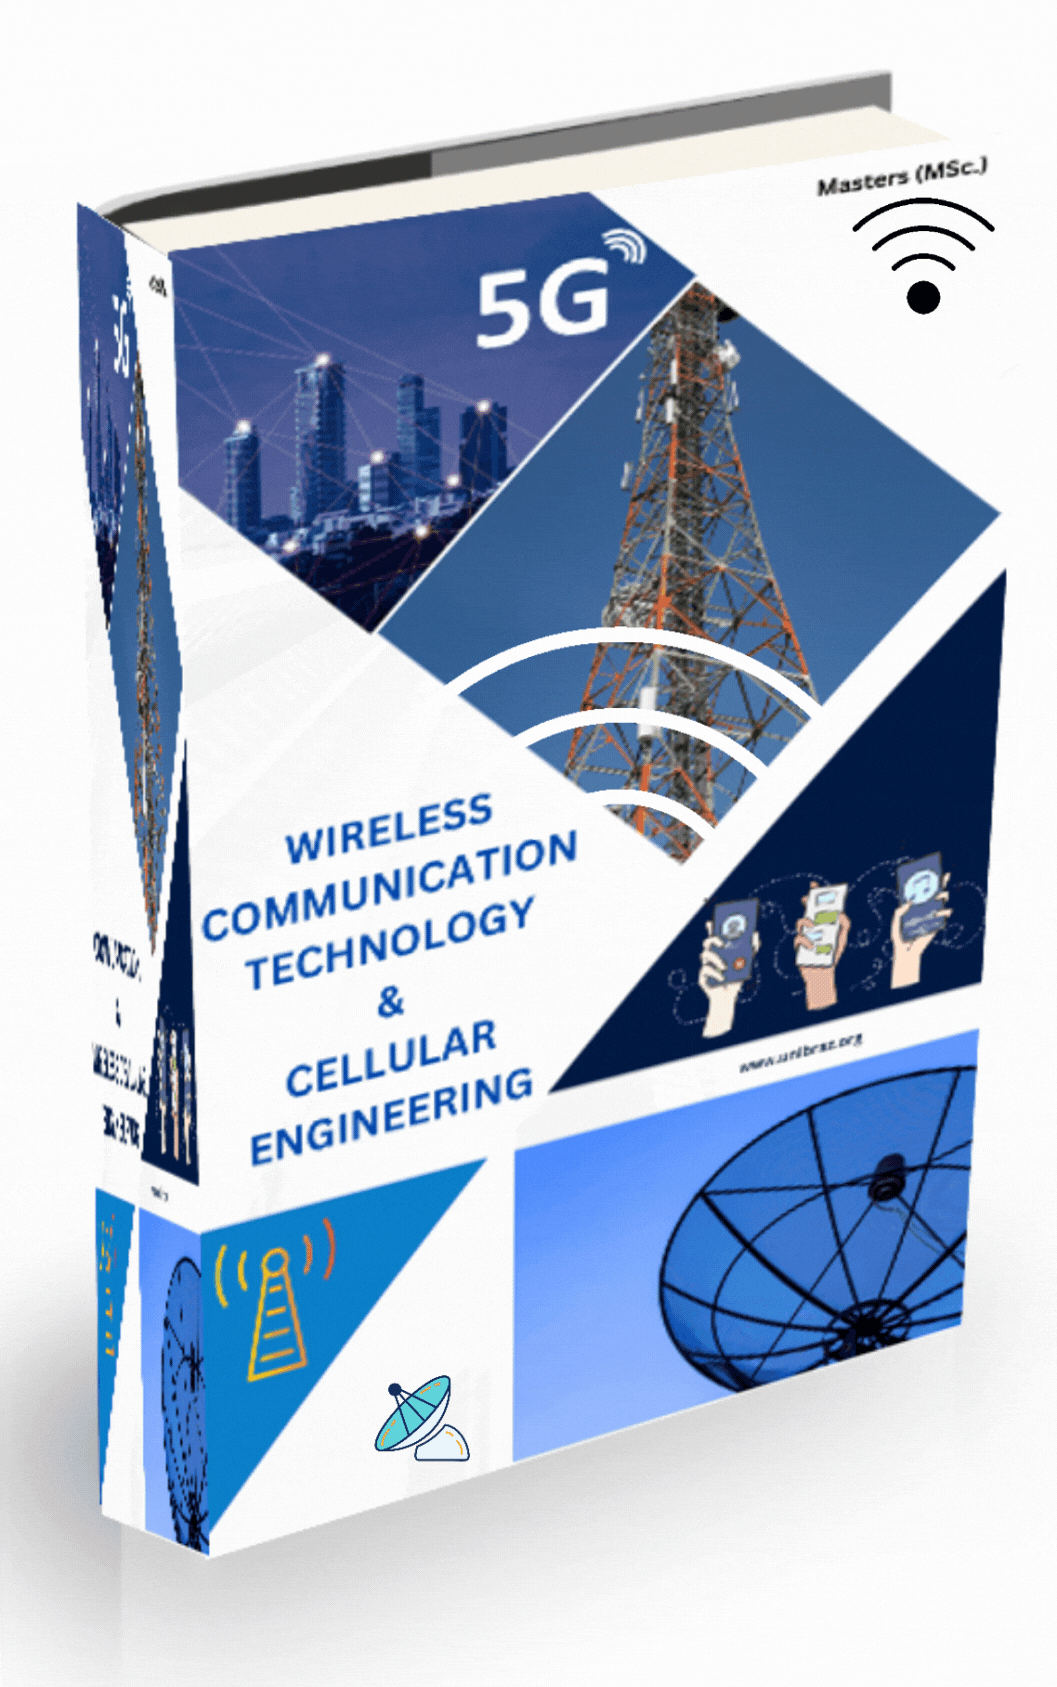 MASTERS OF SCIENCE (MSc.) WIRELESS COMMUNICATION TECHNOLOGY & CELLULAR ENGINEERING